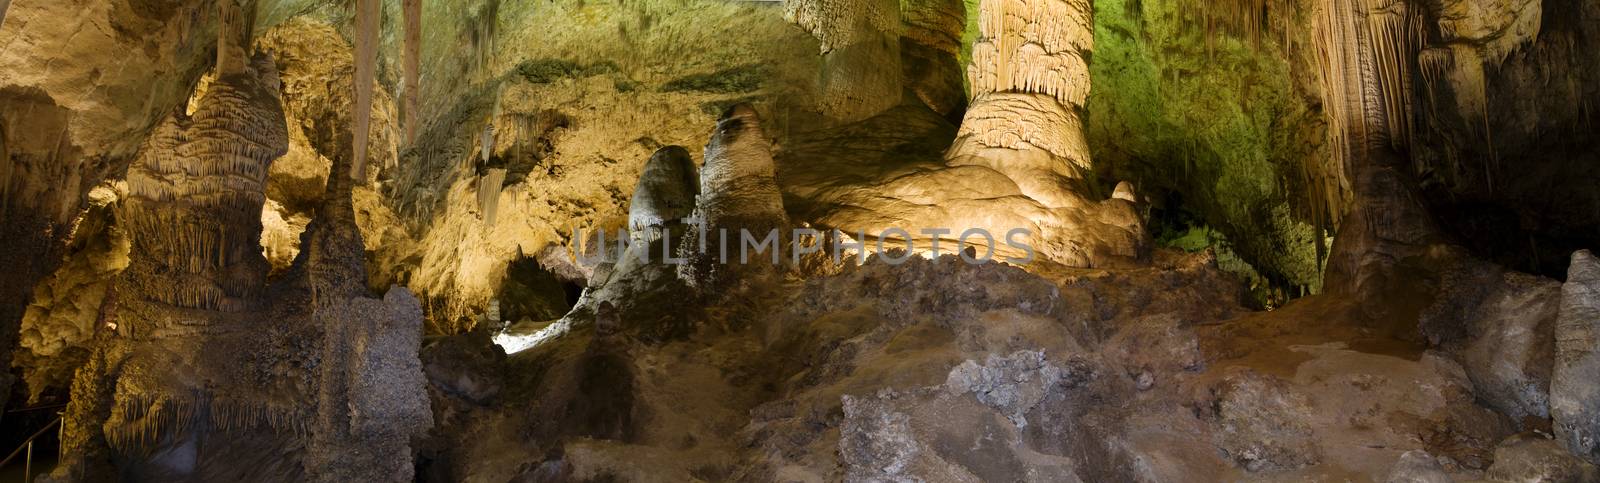 Hall of Giants, Carlsbad Caverns, NM by Njean